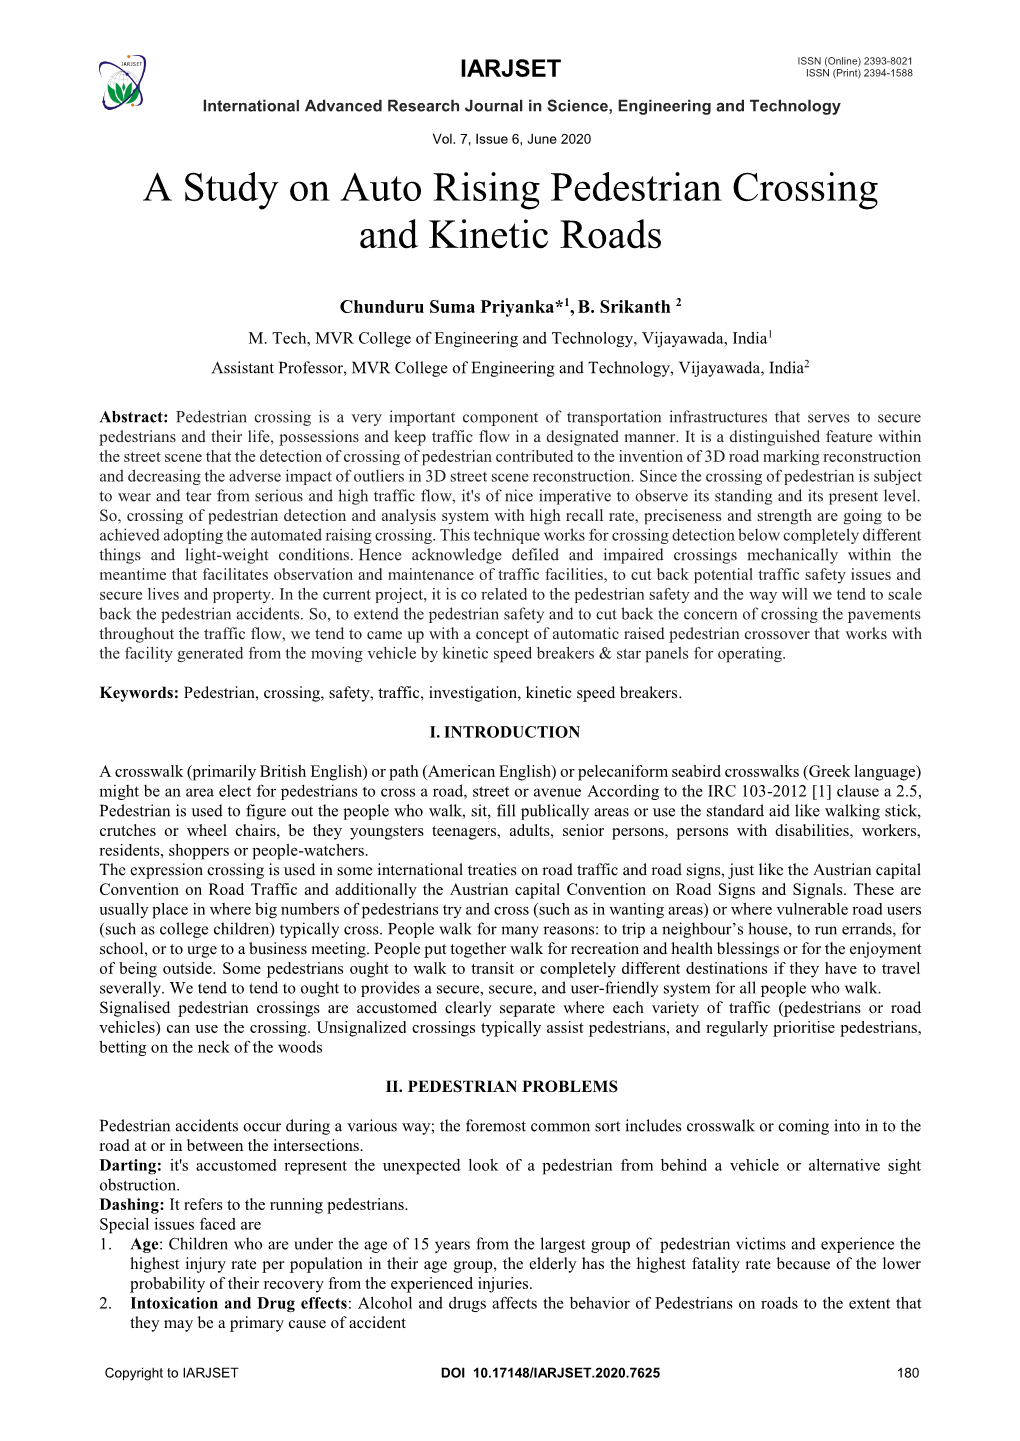 A Study on Auto Rising Pedestrian Crossing and Kinetic Roads